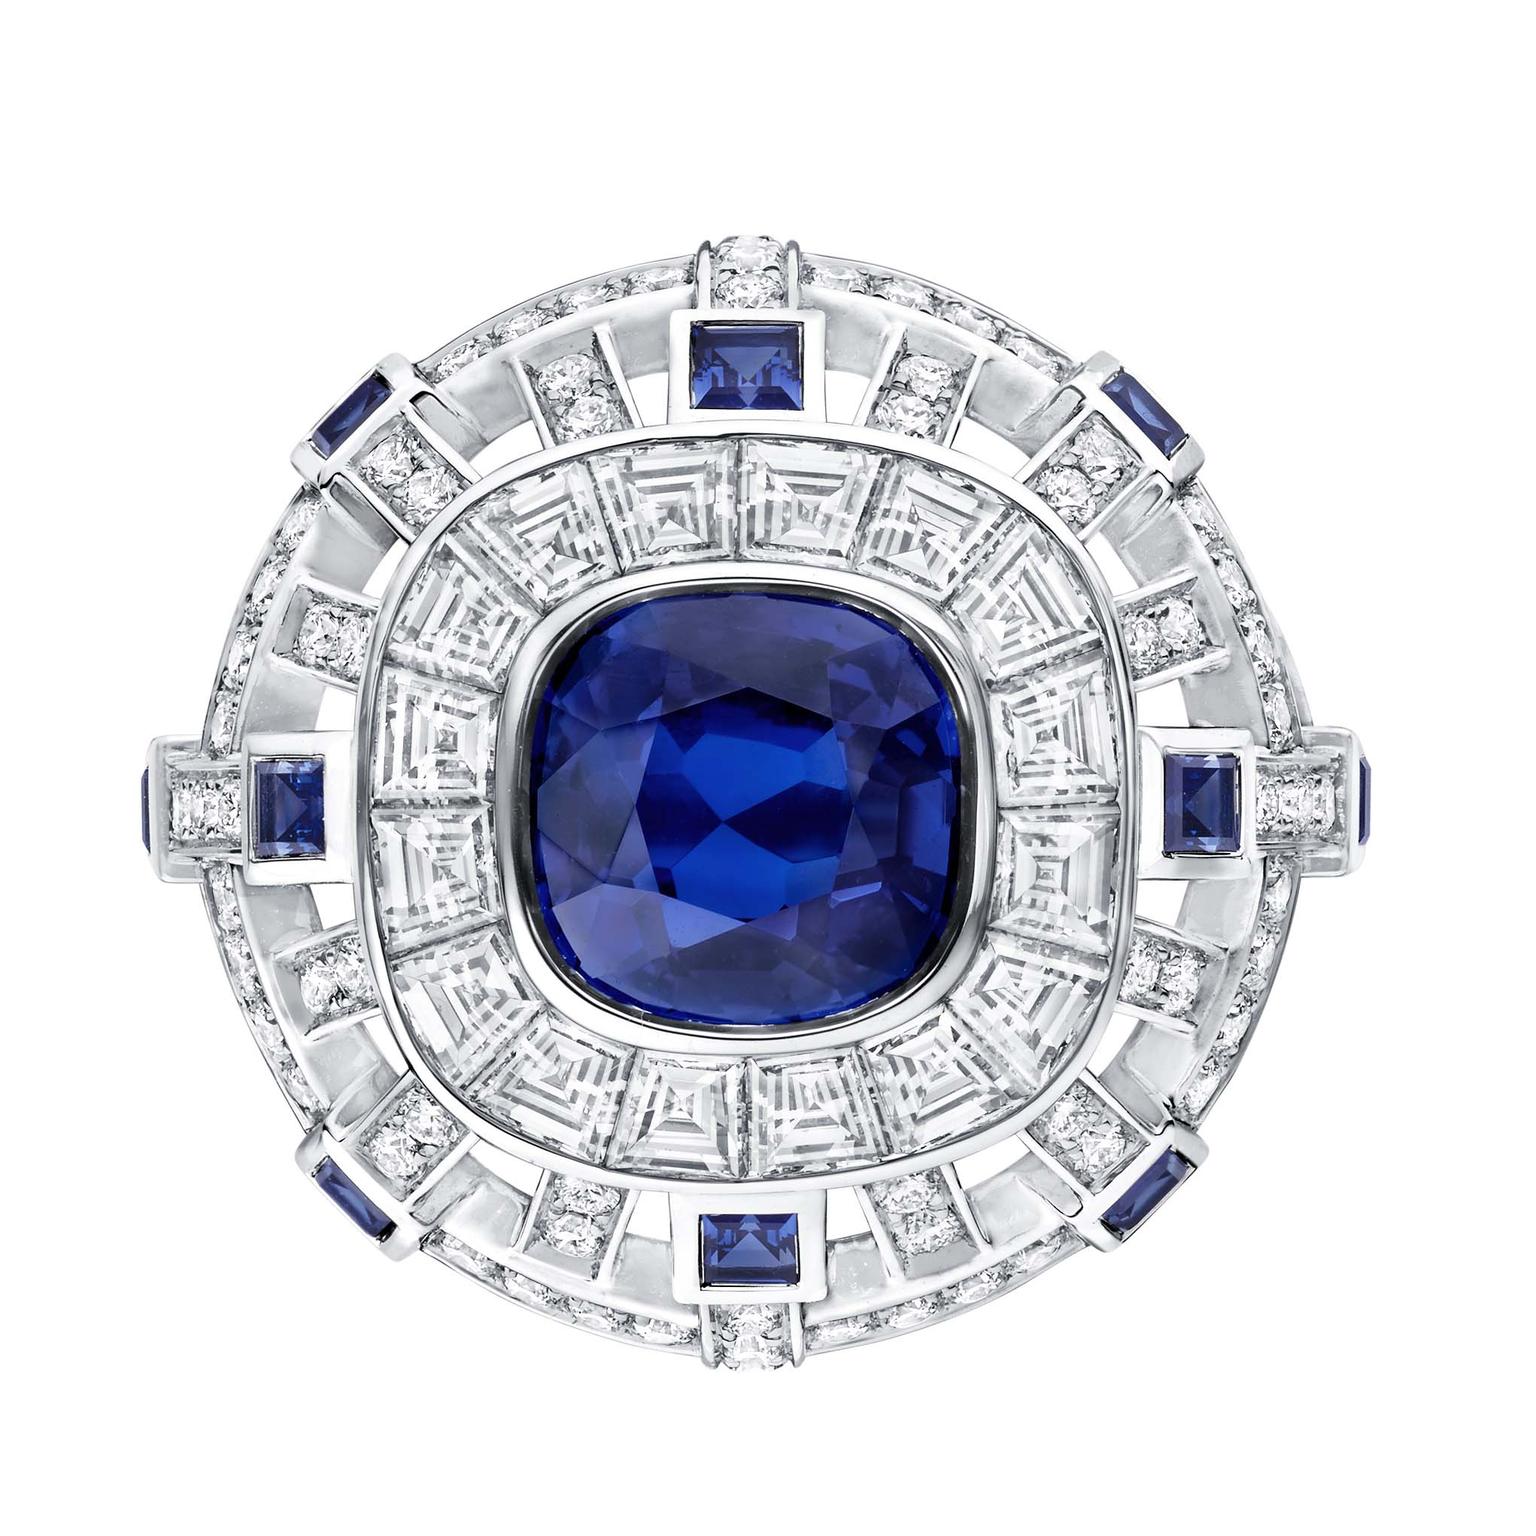 Louis Vuitton Riders of the Knights Le Royaume sapphire and diamond  ring 